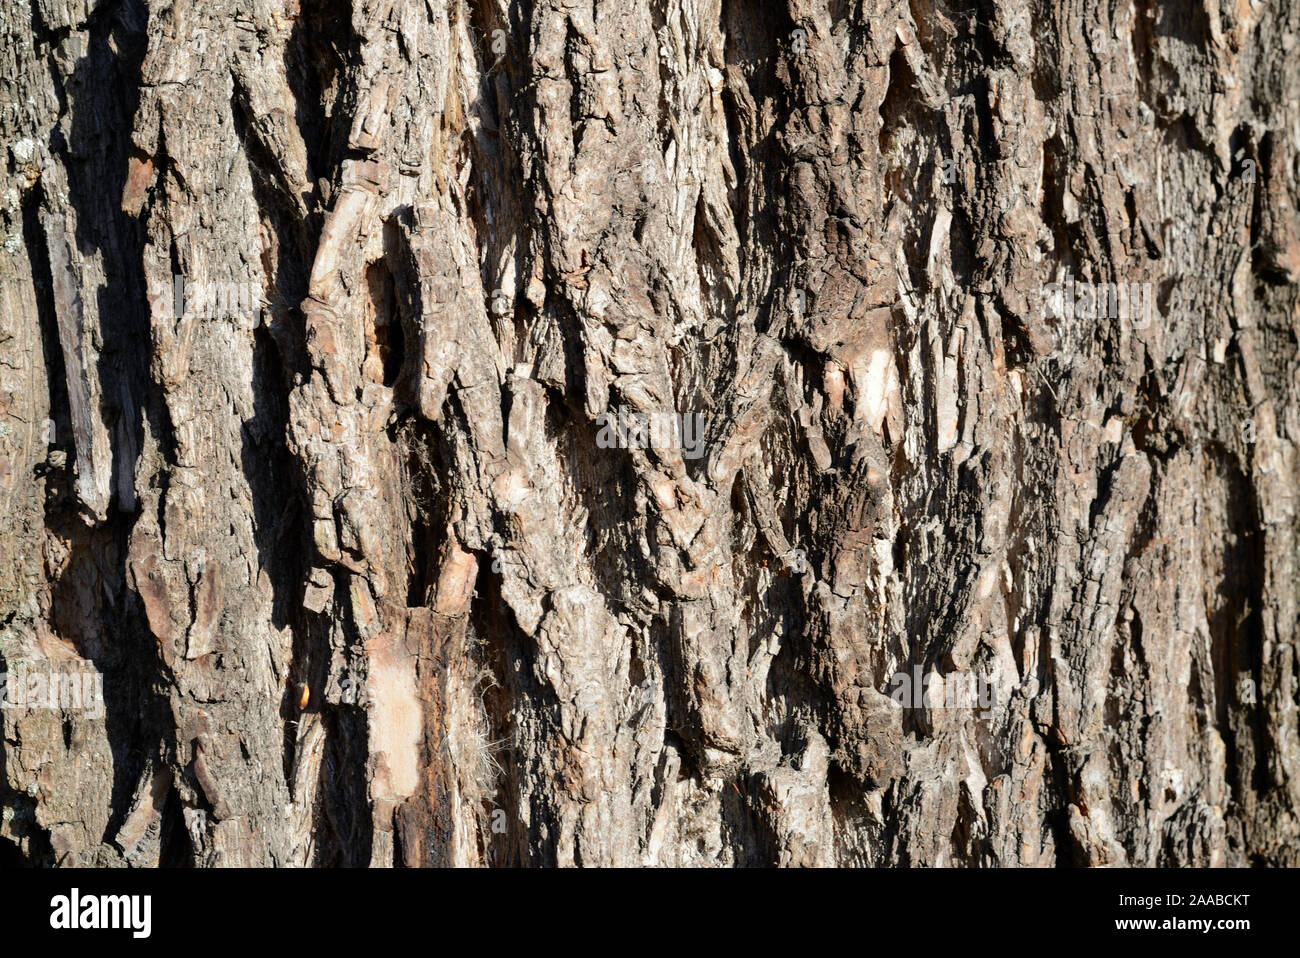 The bark of an old tree lit by the sun closeup. Abstract natural background Stock Photo